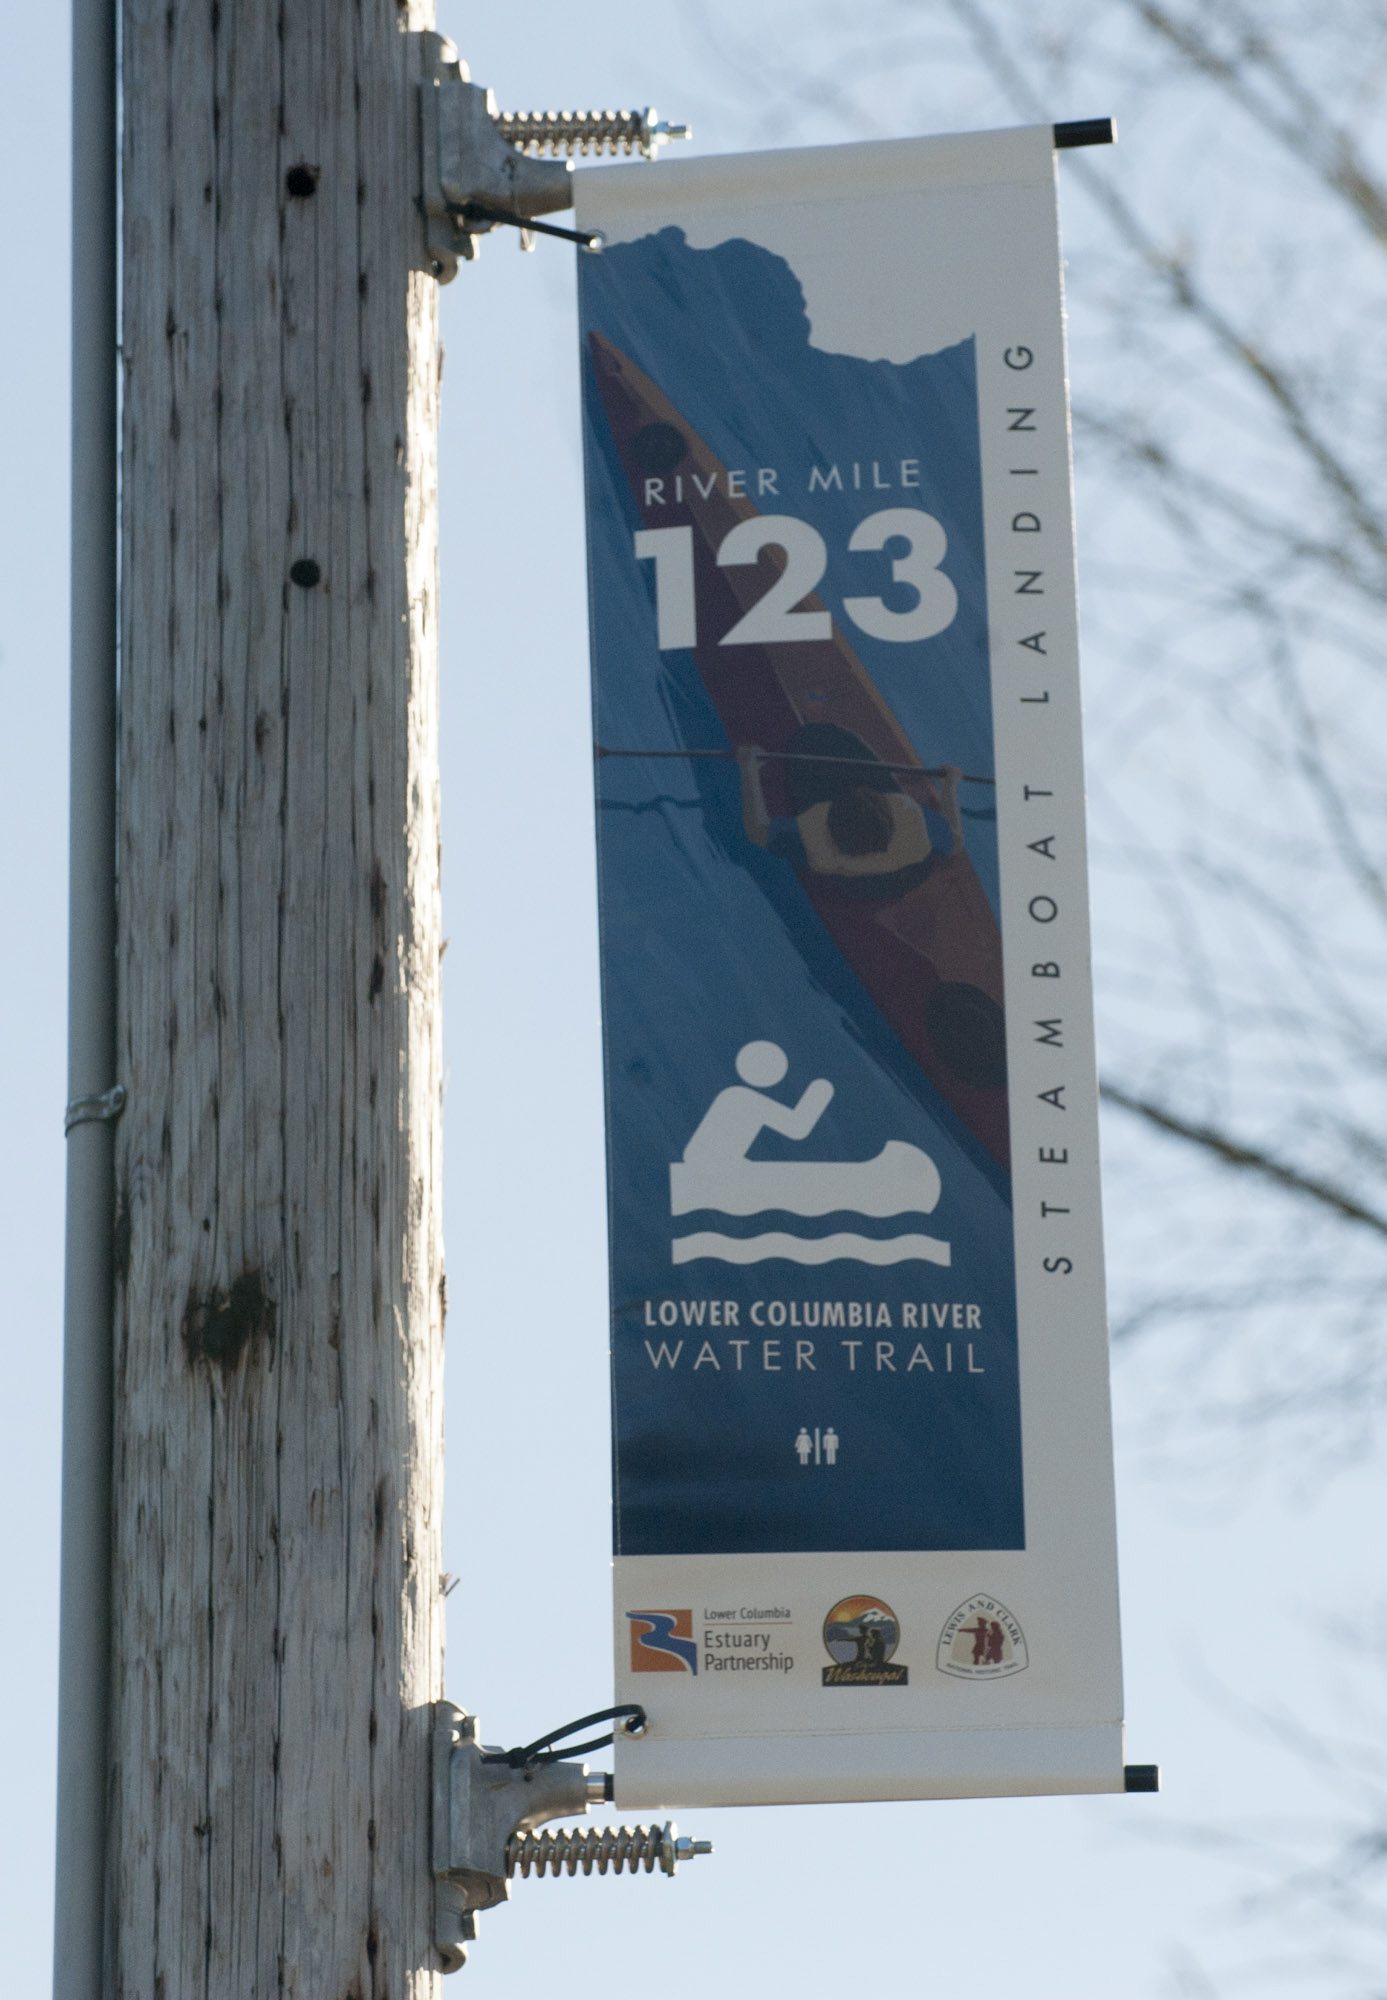 A sign for the Lower Columbia River Water trail hangs at the Port of Camas-Washougal. Stakeholders along the river are posting signs at the water to designate the Columbia River Trail and cater more to non-motorized users.